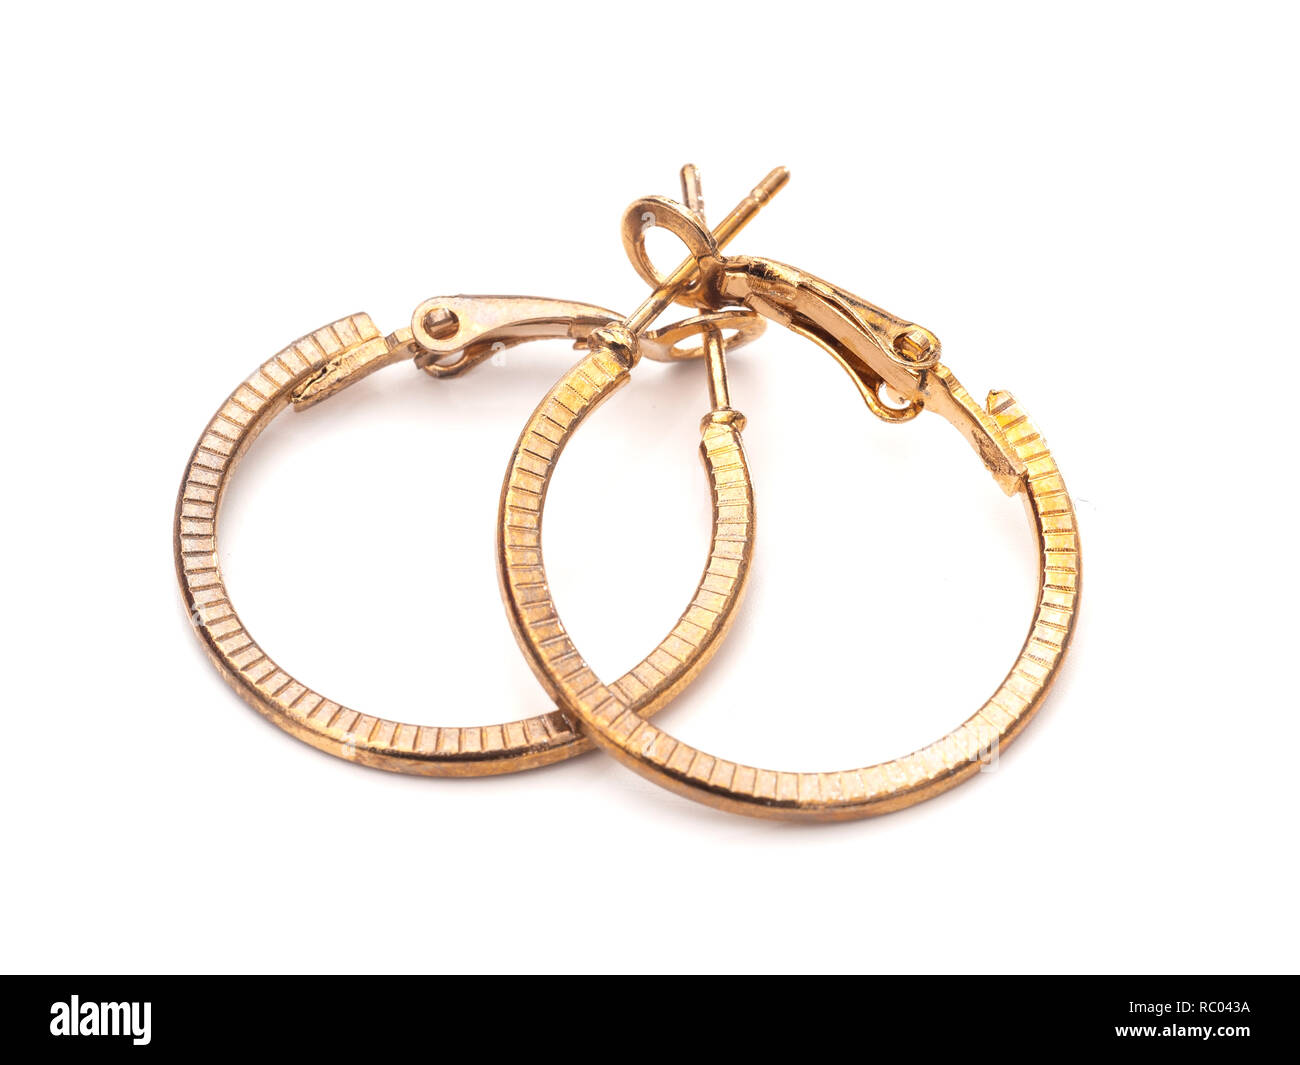 Vintage gold colour hoop earrings, pair, on white background. Stock Photo